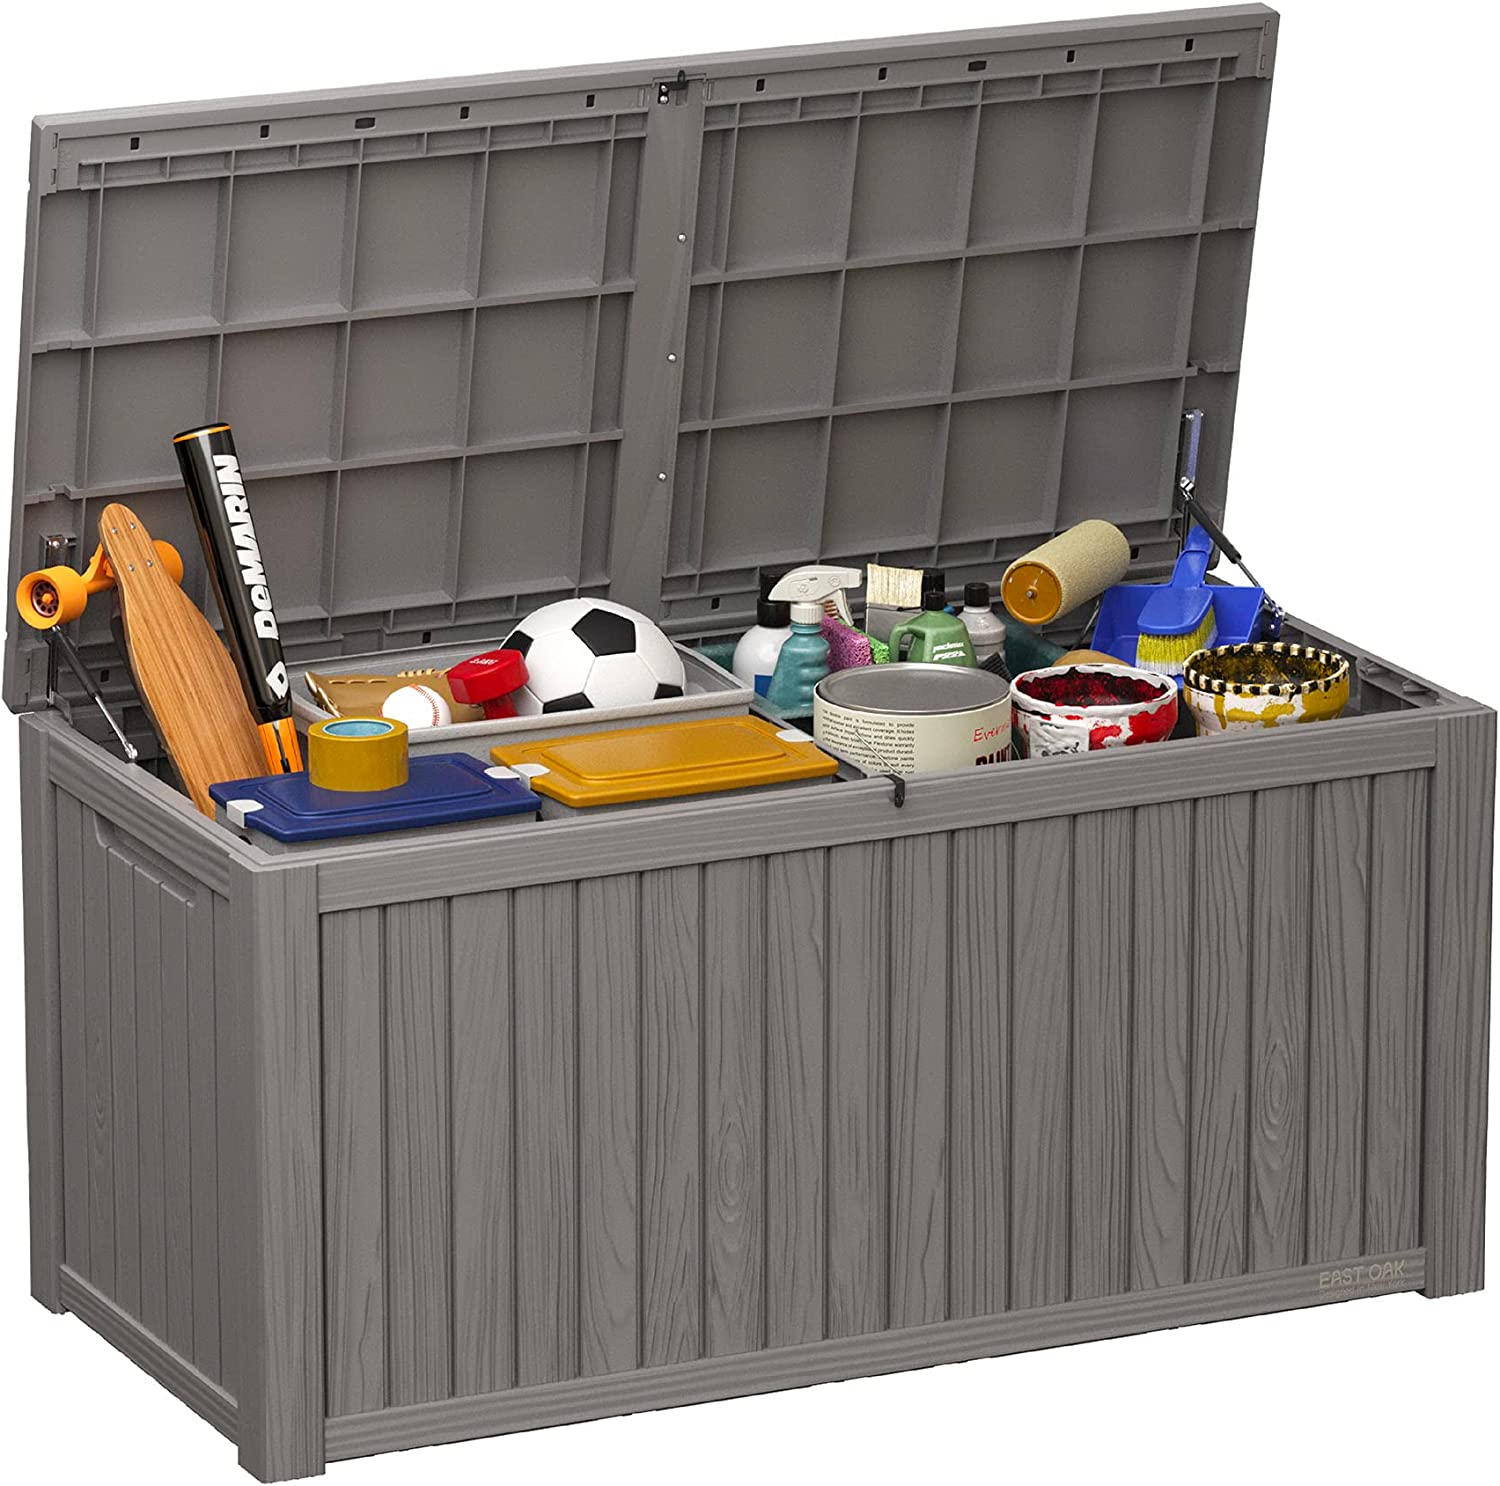 https://bigbigmart.com/wp-content/uploads/2023/05/EAST-OAK-180-Gallon-Deck-Box-Outdoor-Storage-Box-With-Padlock-for-Patio-Furniture-Patio-Cushions-Gardening-Tools-Pool-Supplies-Waterproof-and-UV-Resistant-Grey.jpg